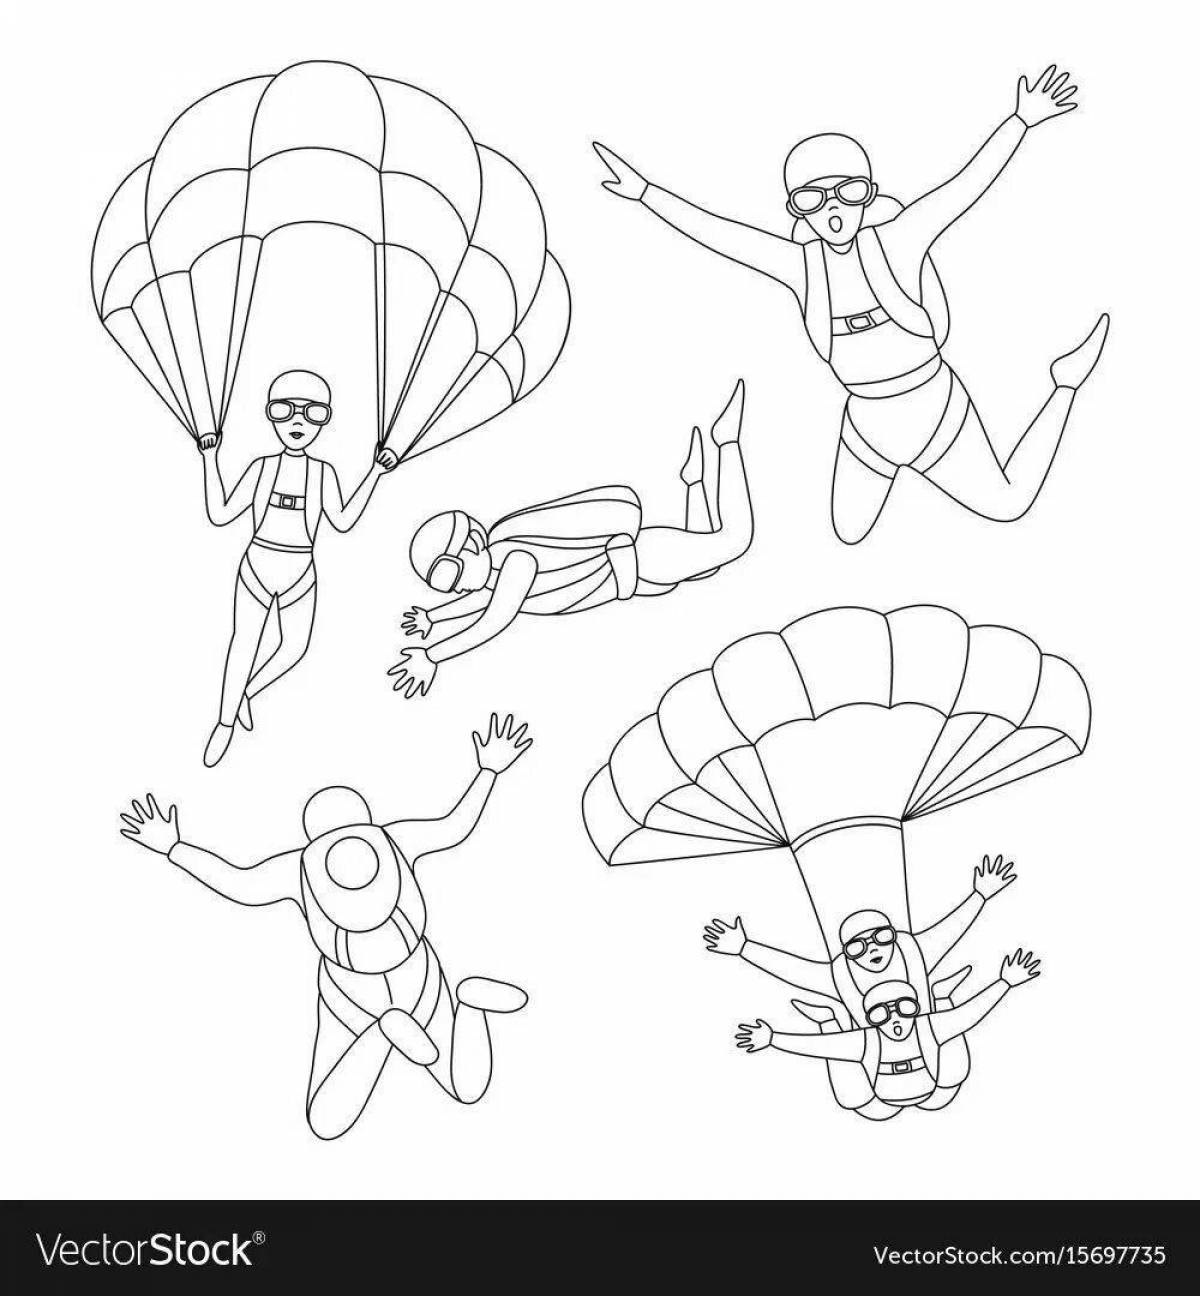 Tempting parachute coloring page for kids